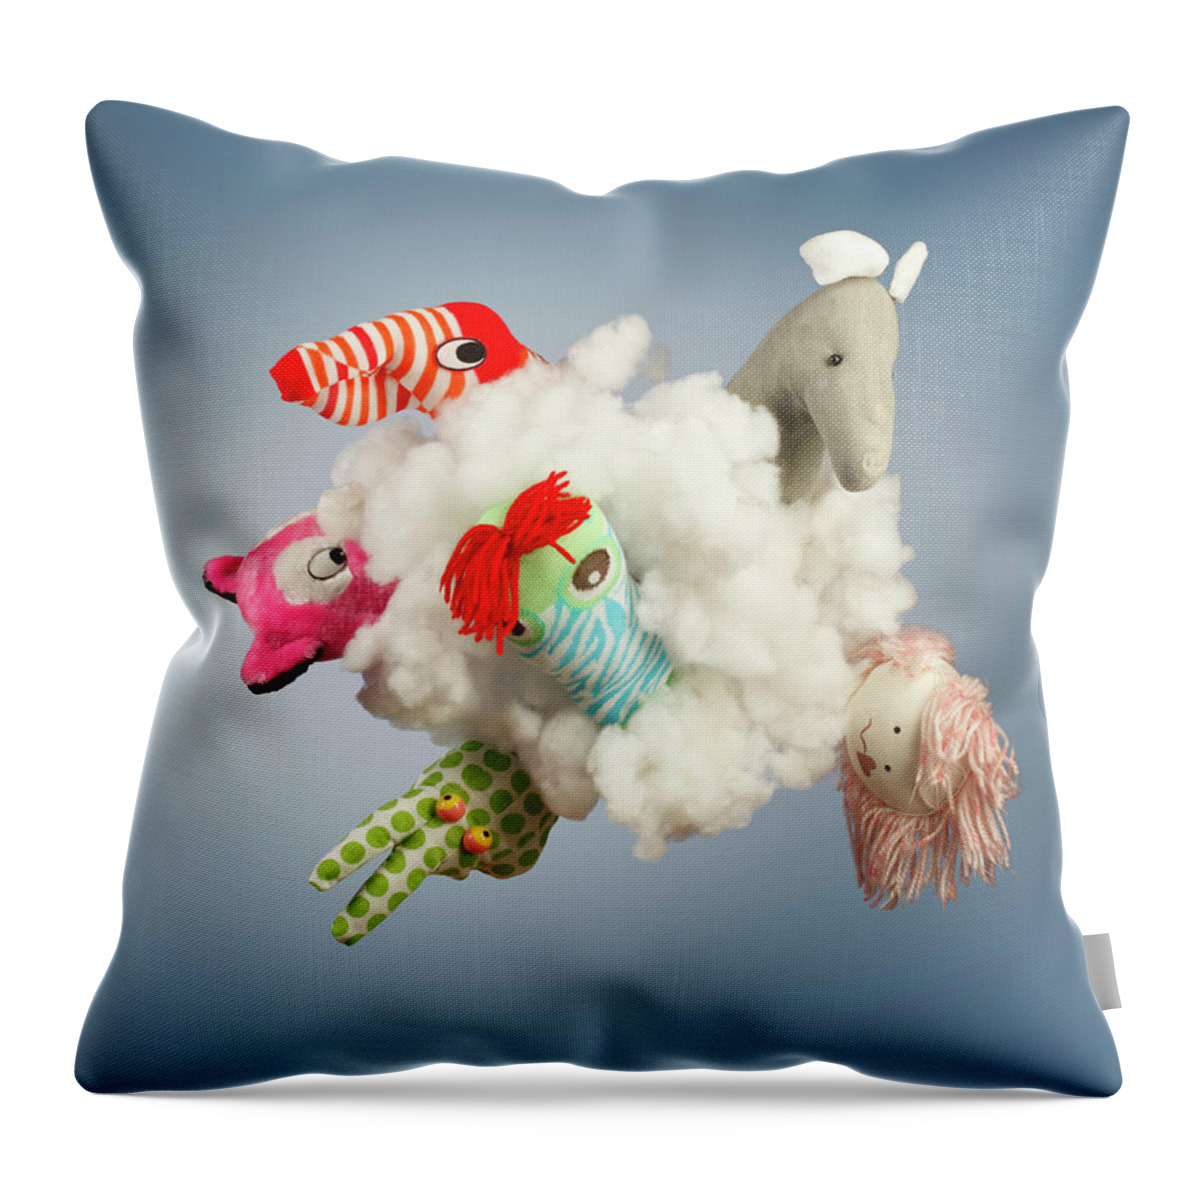 Newcraft Throw Pillow featuring the photograph Toy Figure In Cloud by Paul Taylor